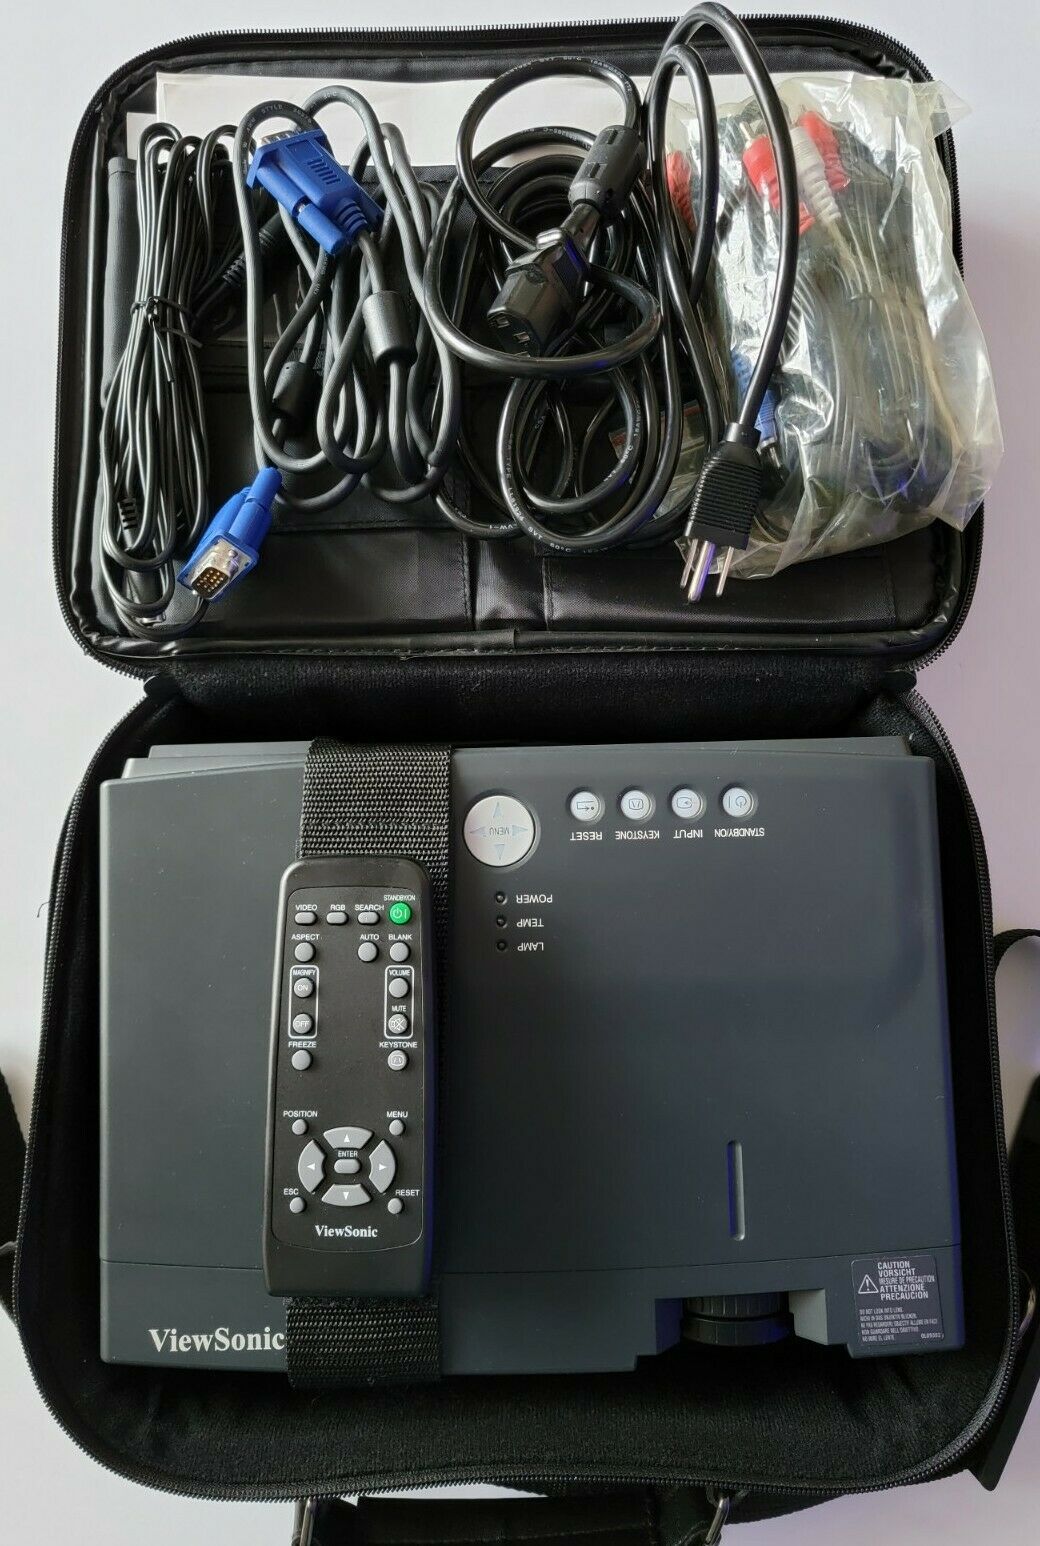 Viewsonic Pj501 Video Projector W/ Remote, Cables, Case & Instructions.